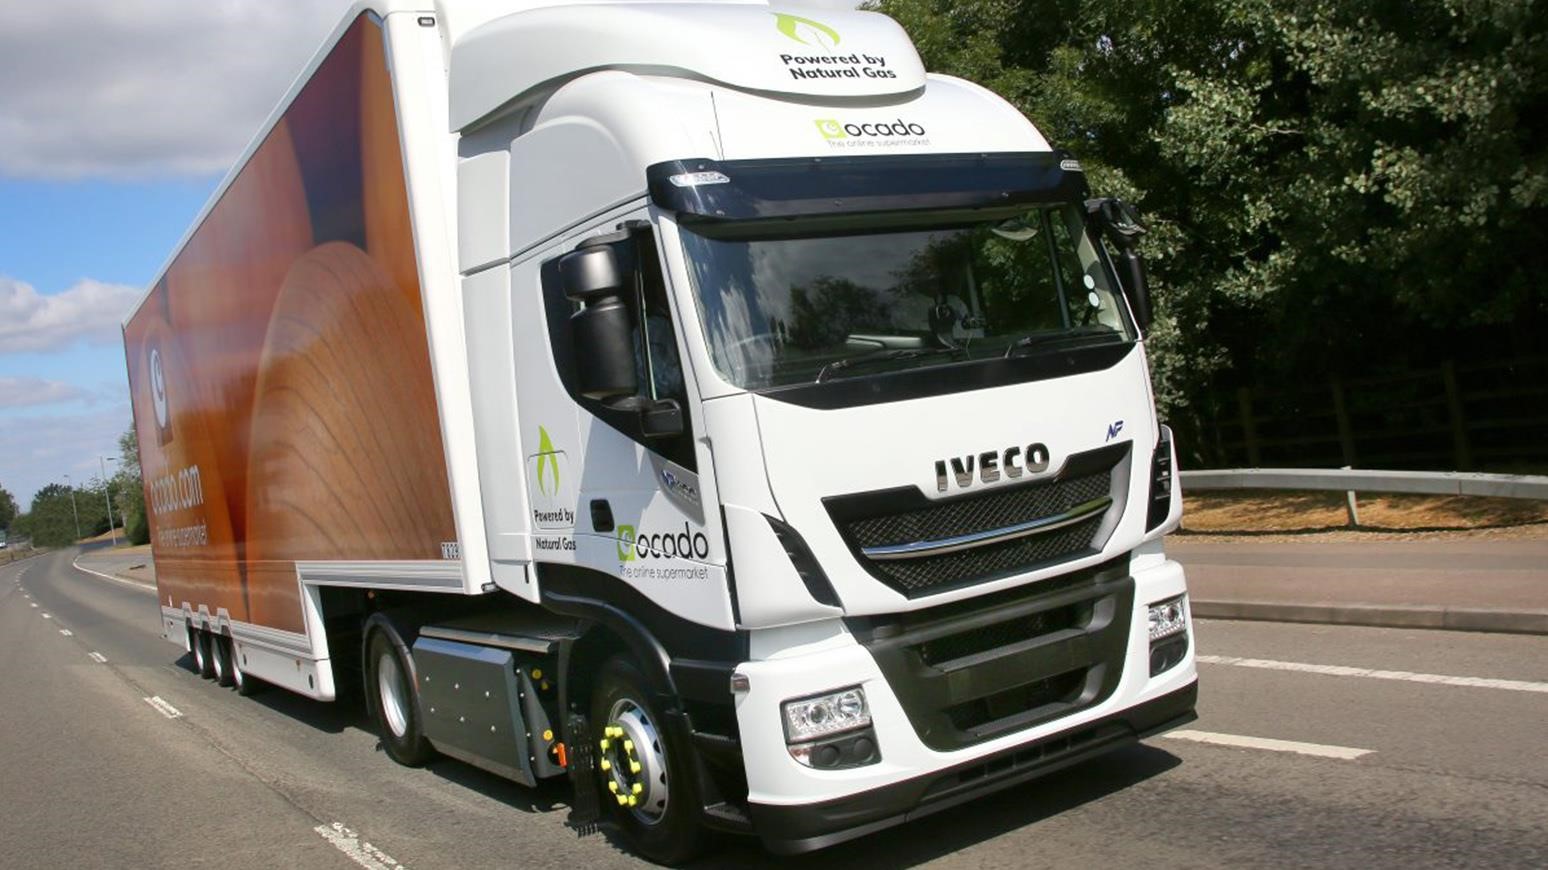 IVECO Sells 29 IVECO Stralis NP CNG Trucks To Ocado, Largest Such Order In UK History